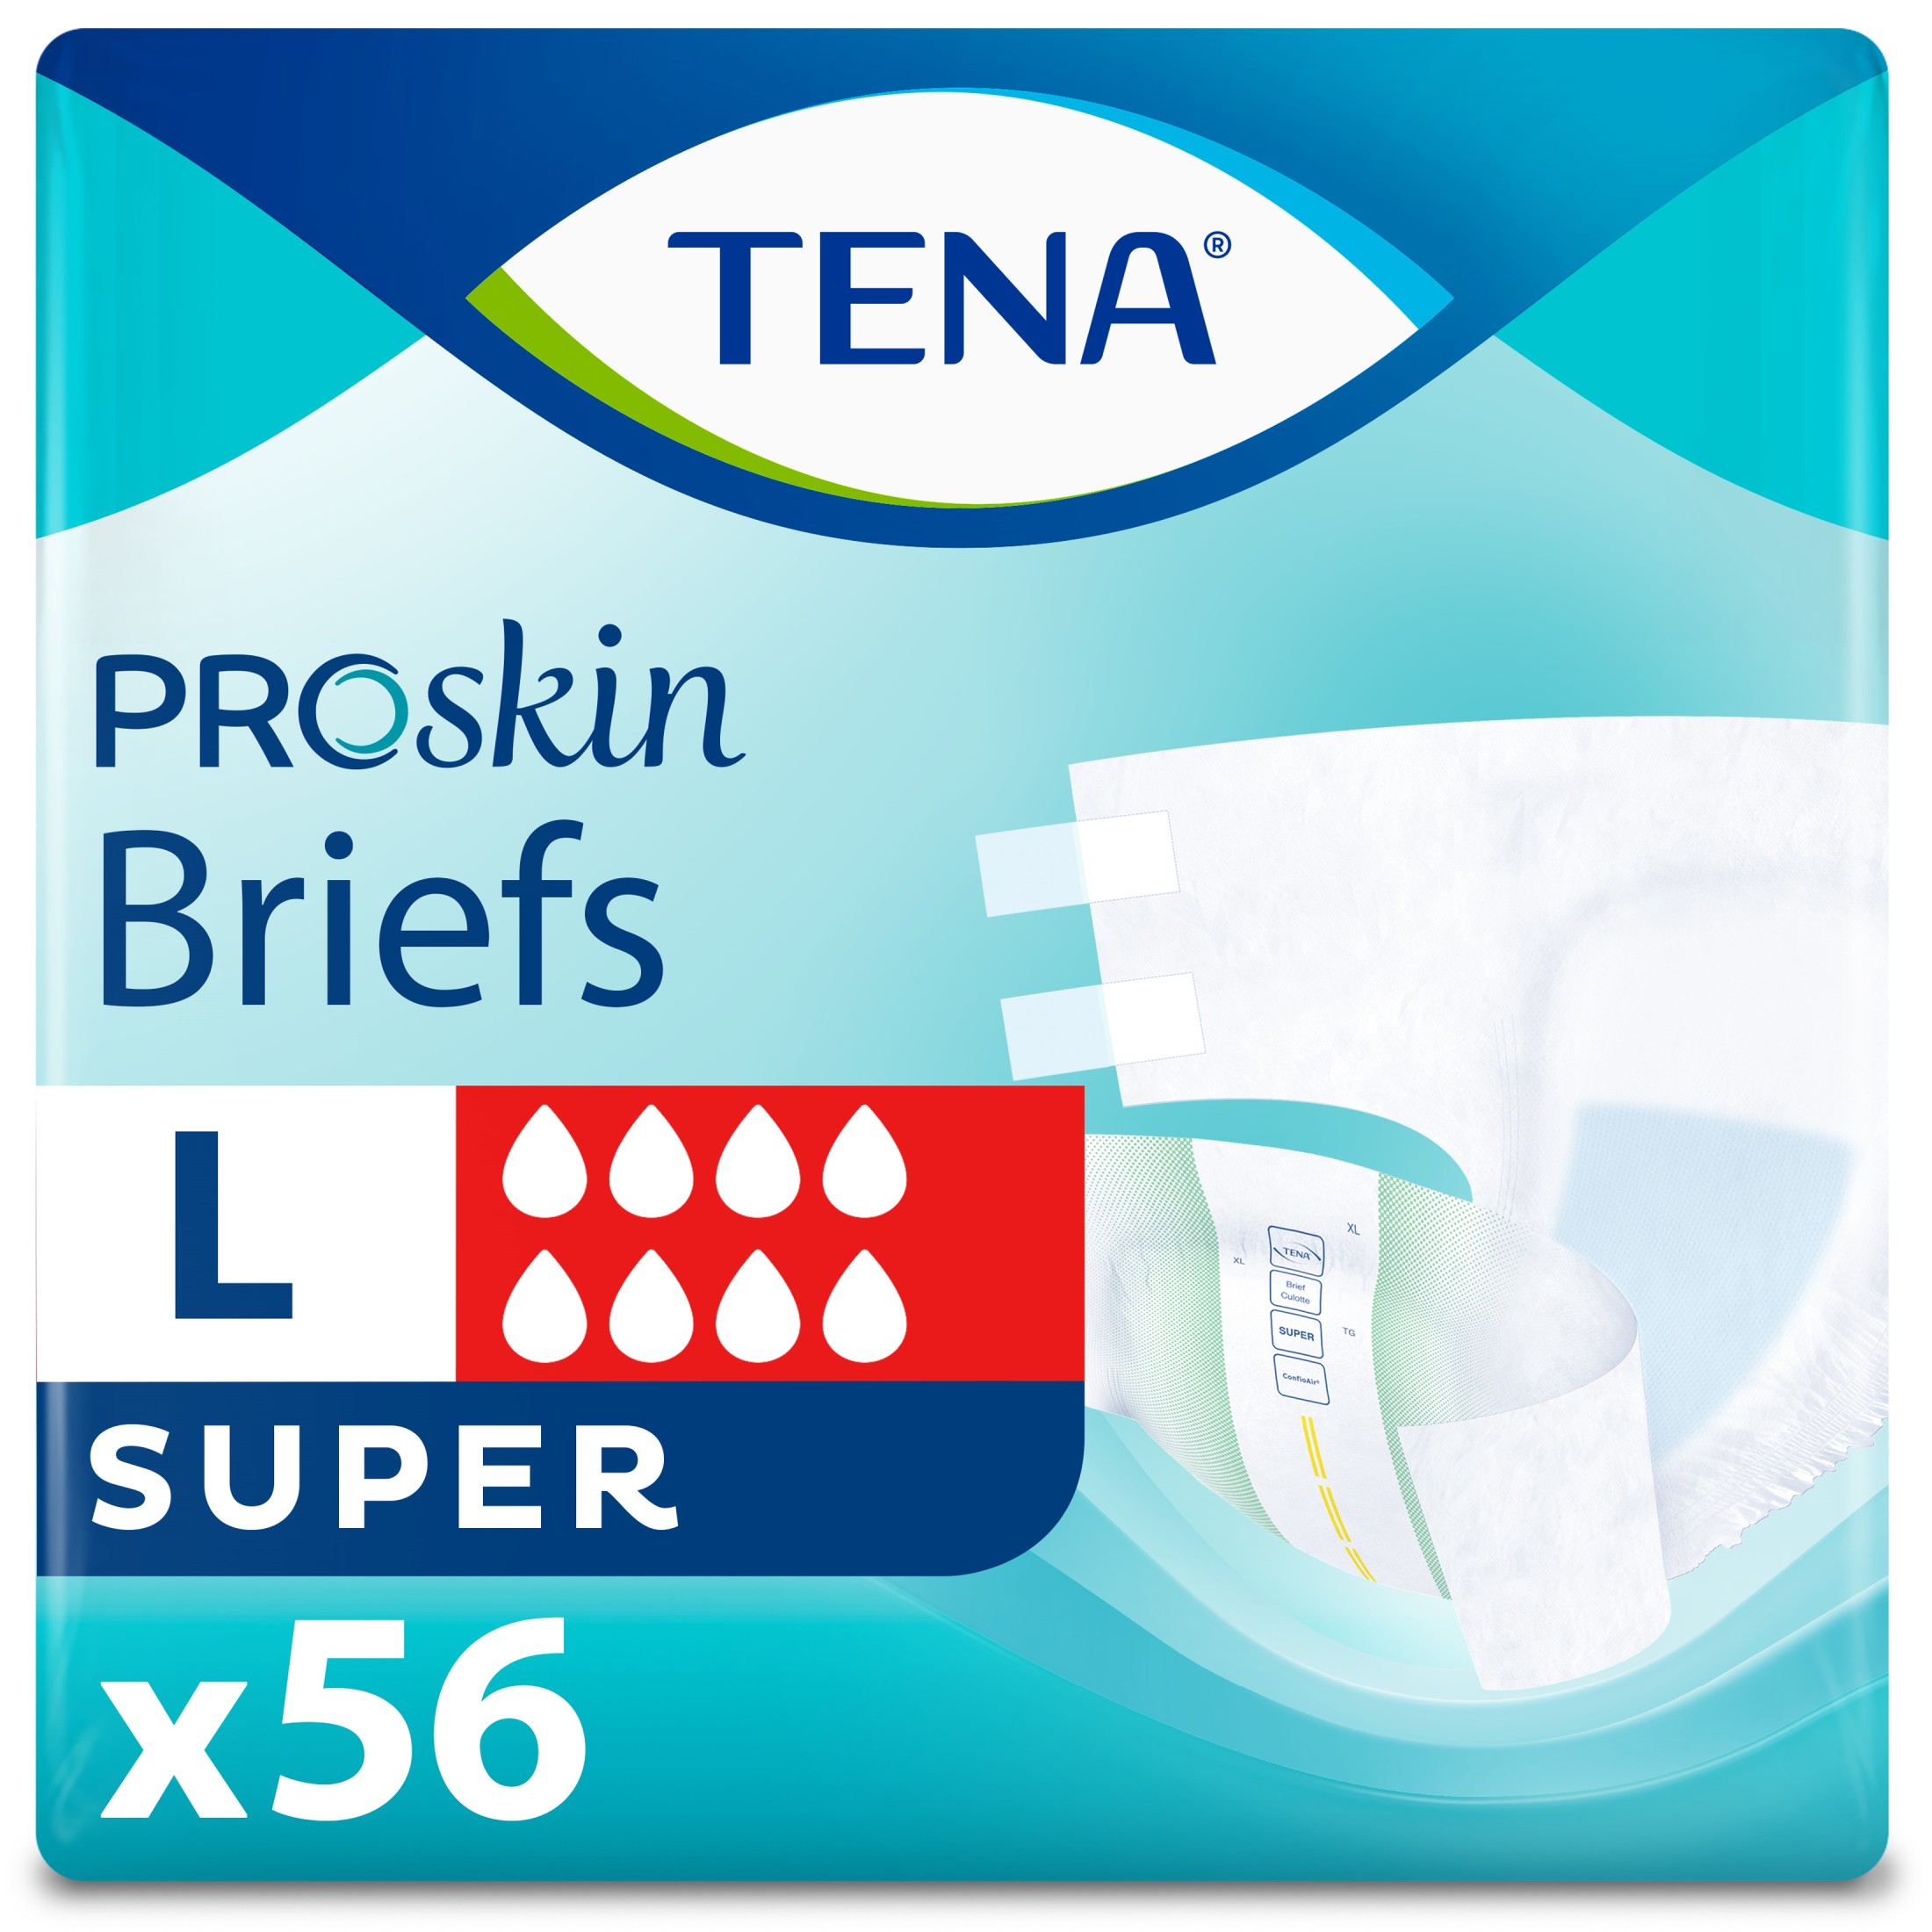 Tena ProSkin Unisex Adult Diapers, Maximum Absorbency, Large, 56 Ct - image 1 of 10